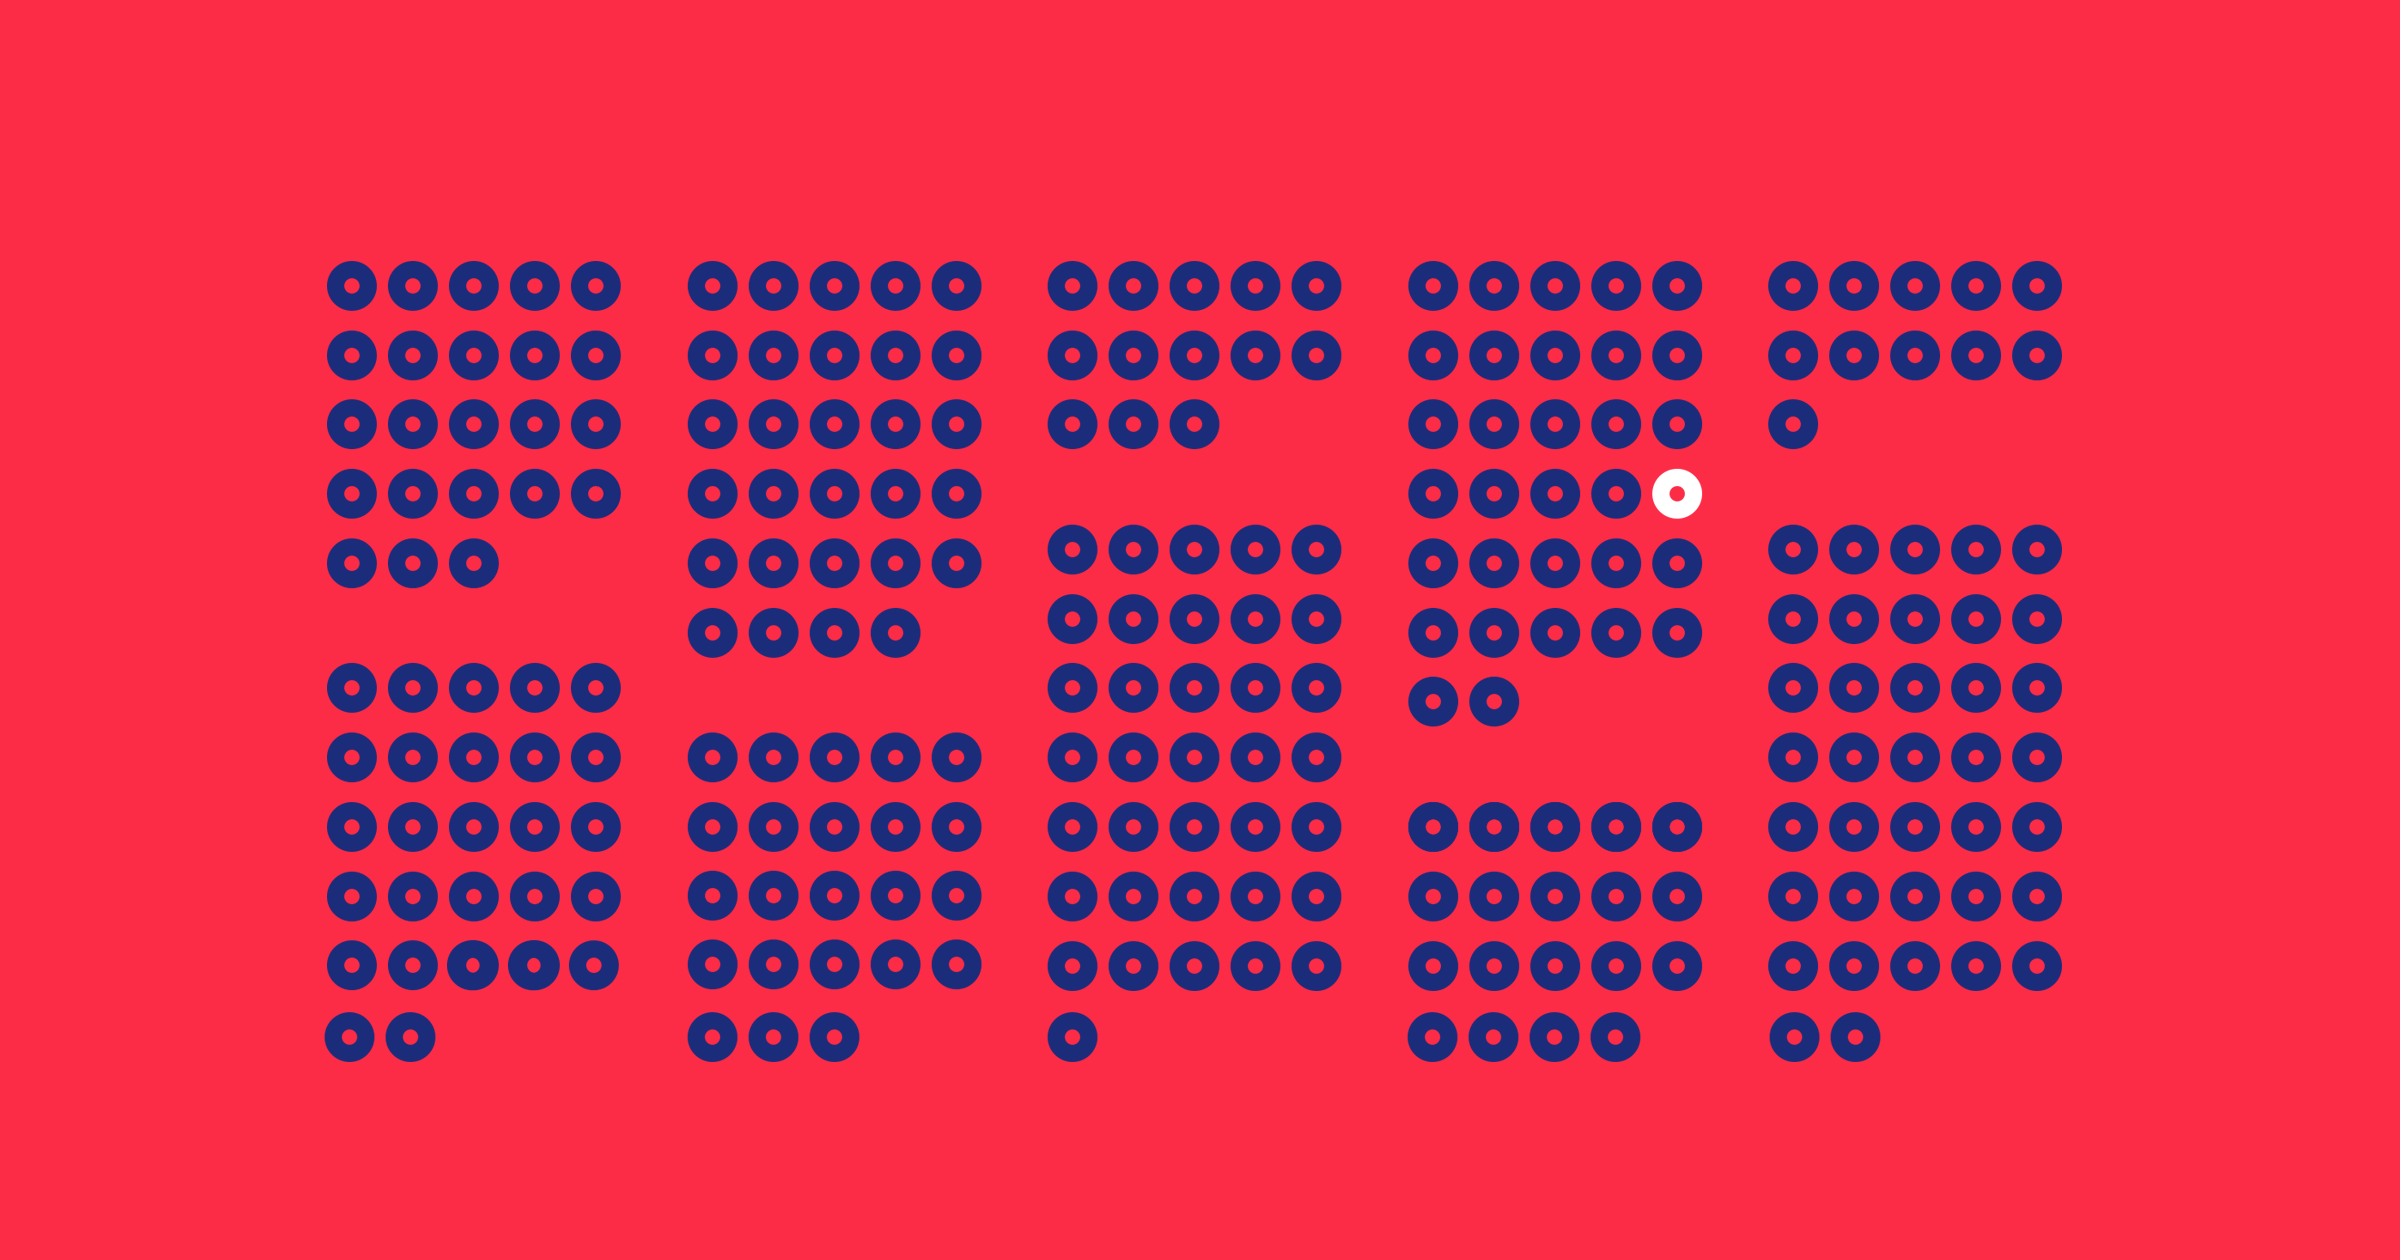 A bright red background with 249 blue dots, and one white dot.